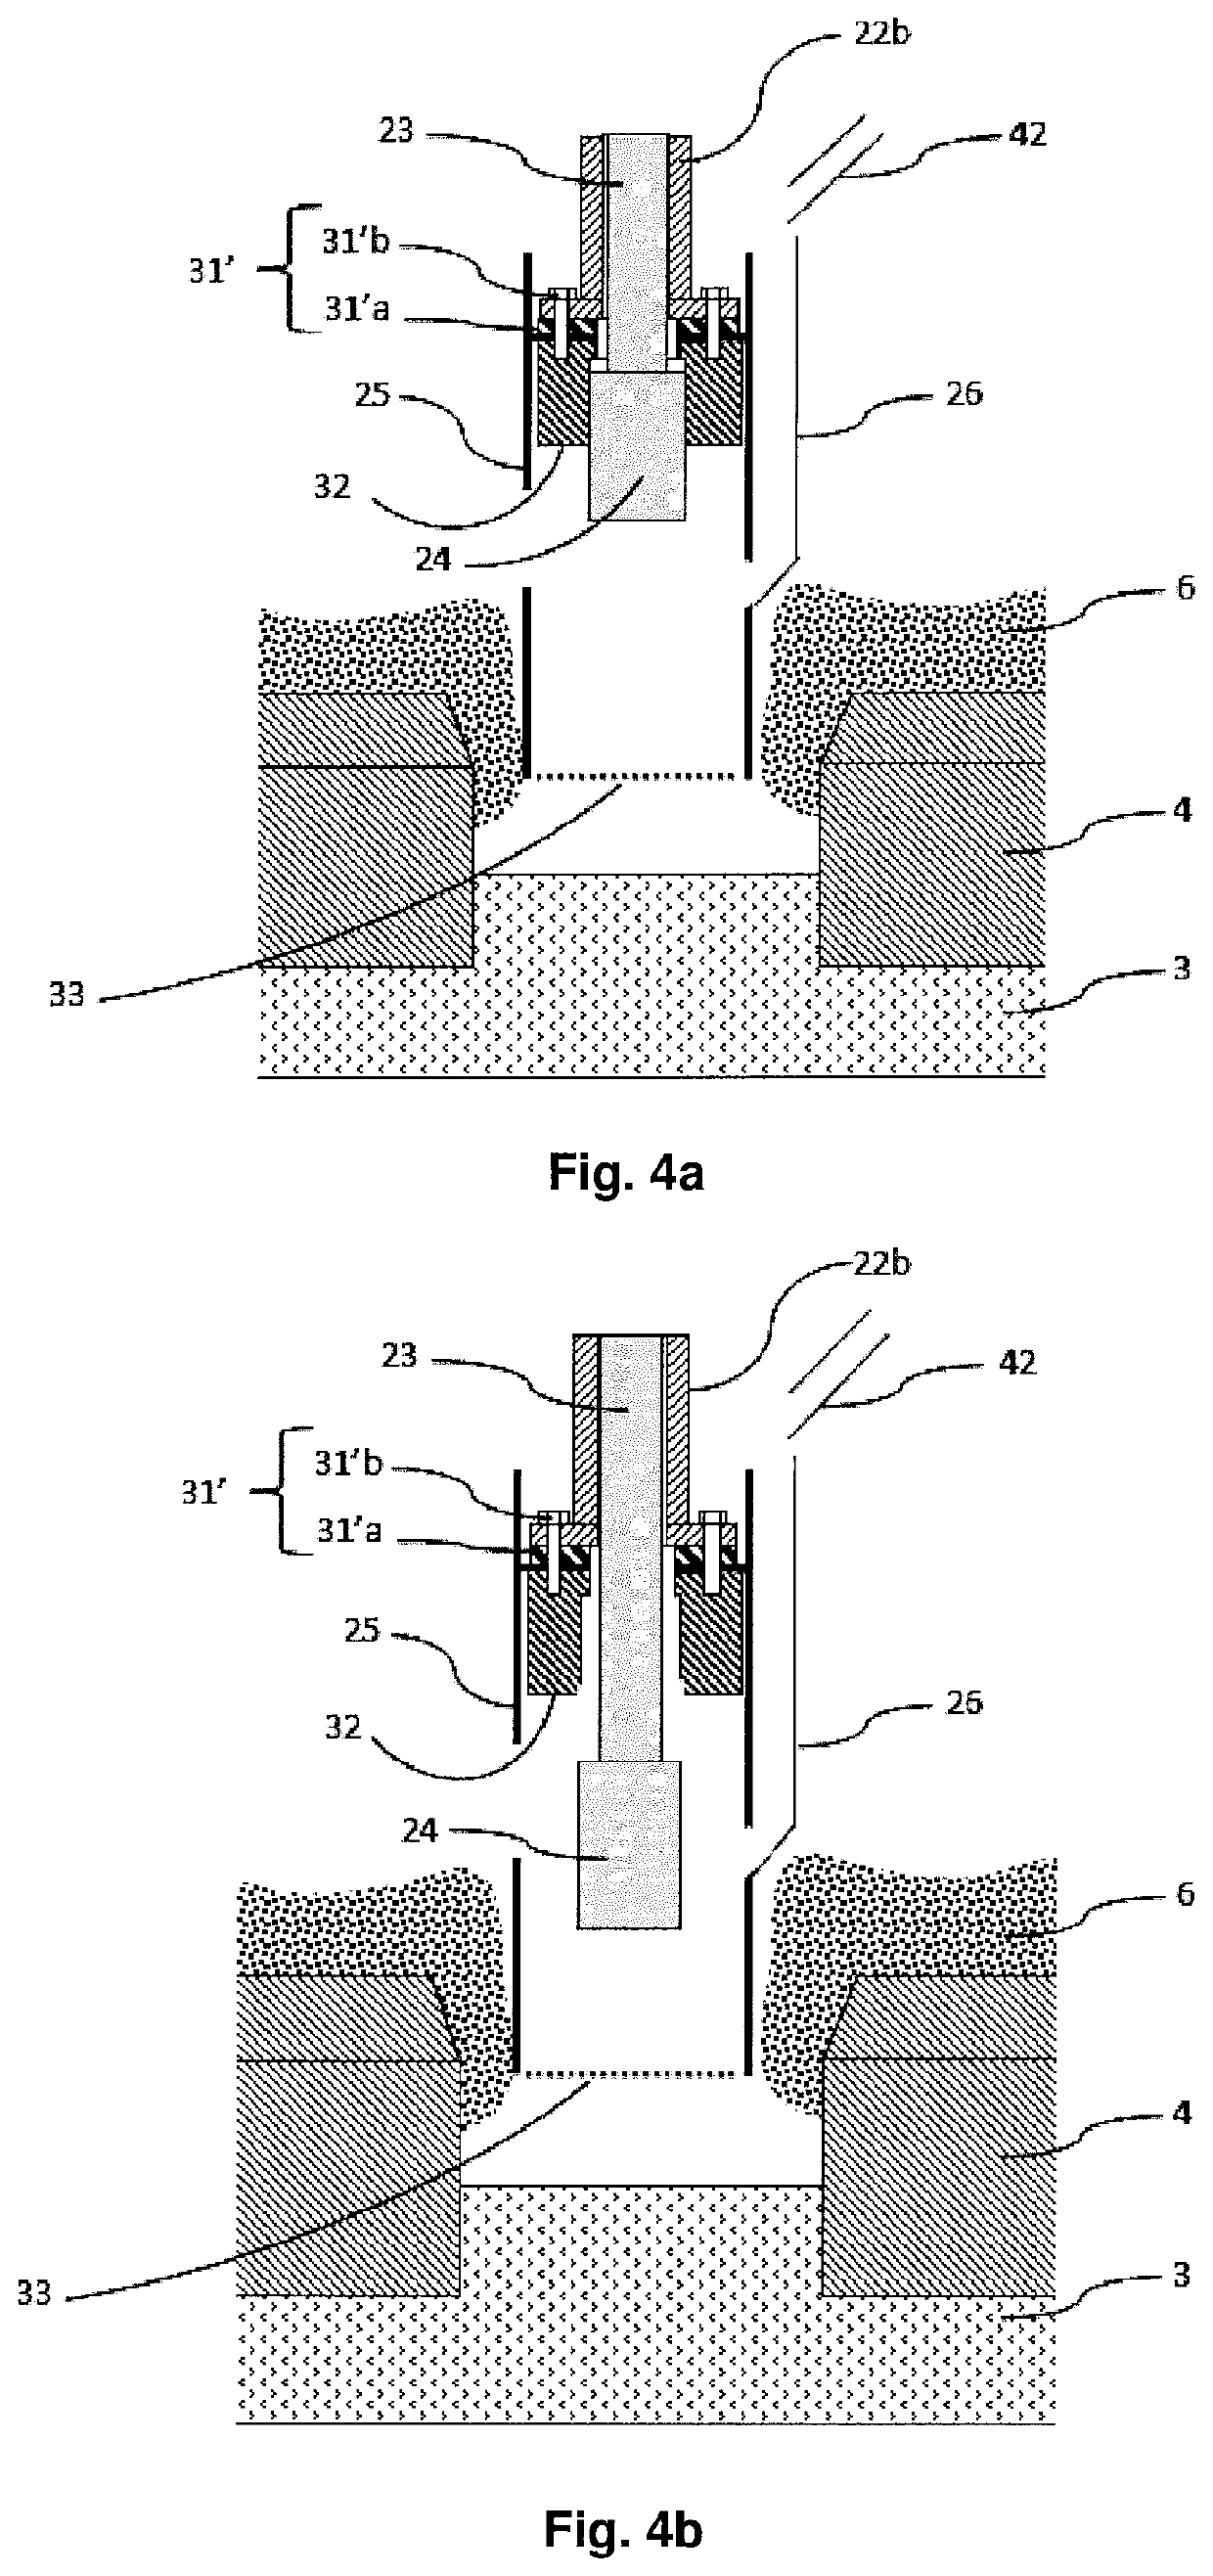 Drilling device comprising a tubular sheath secured to an actuator